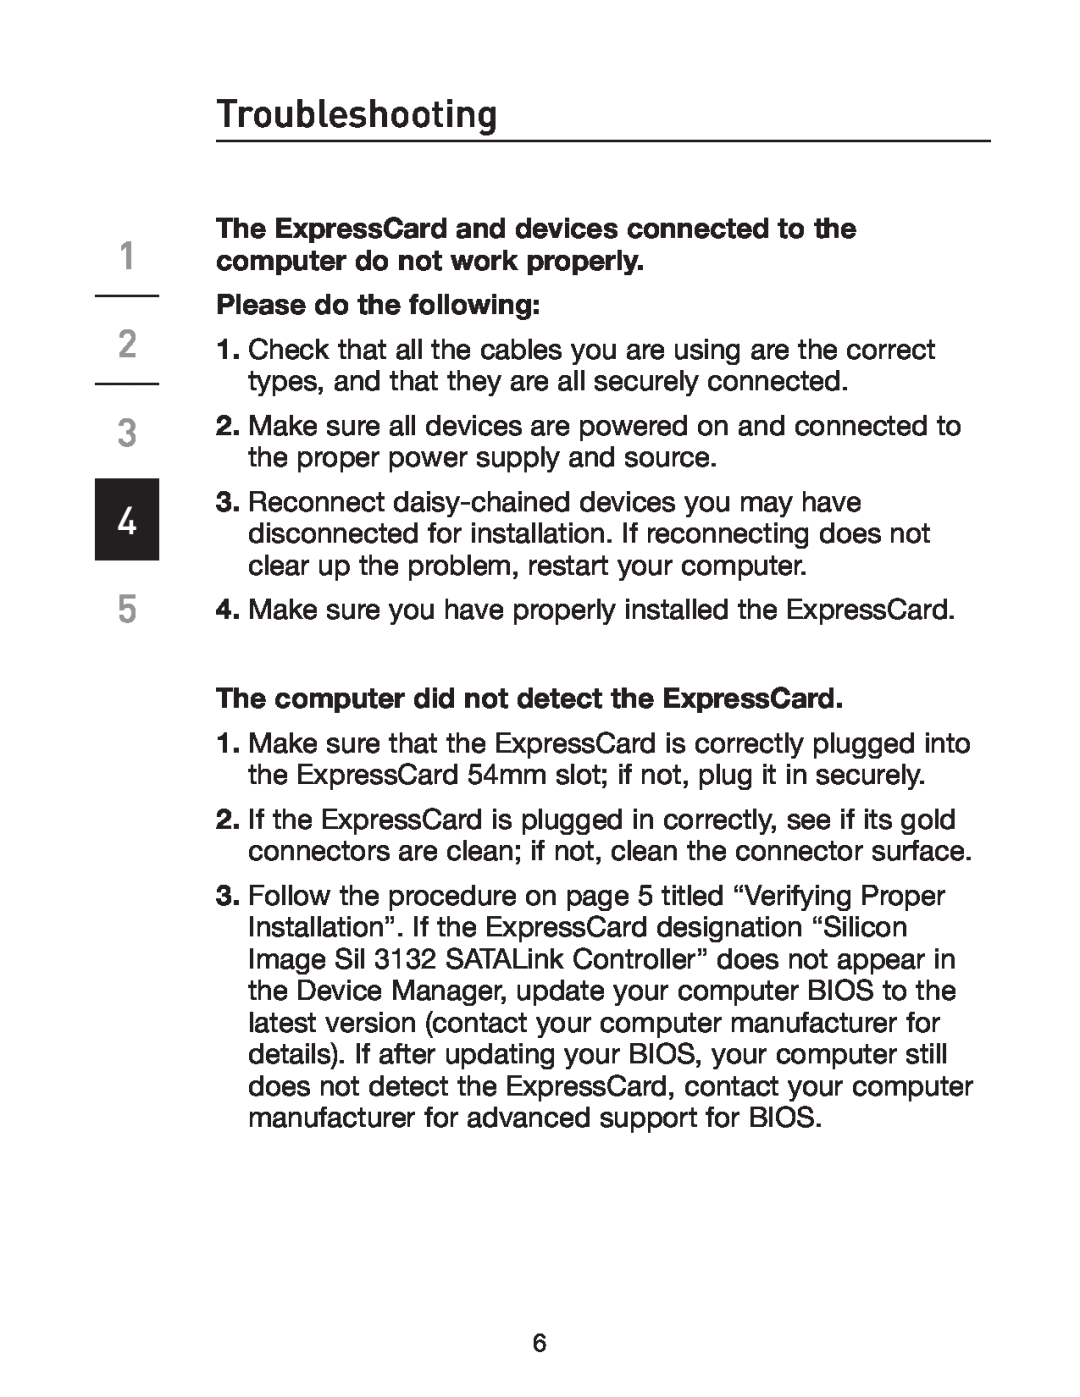 Belkin F5U239 Troubleshooting, The ExpressCard and devices connected to the, The computer did not detect the ExpressCard 